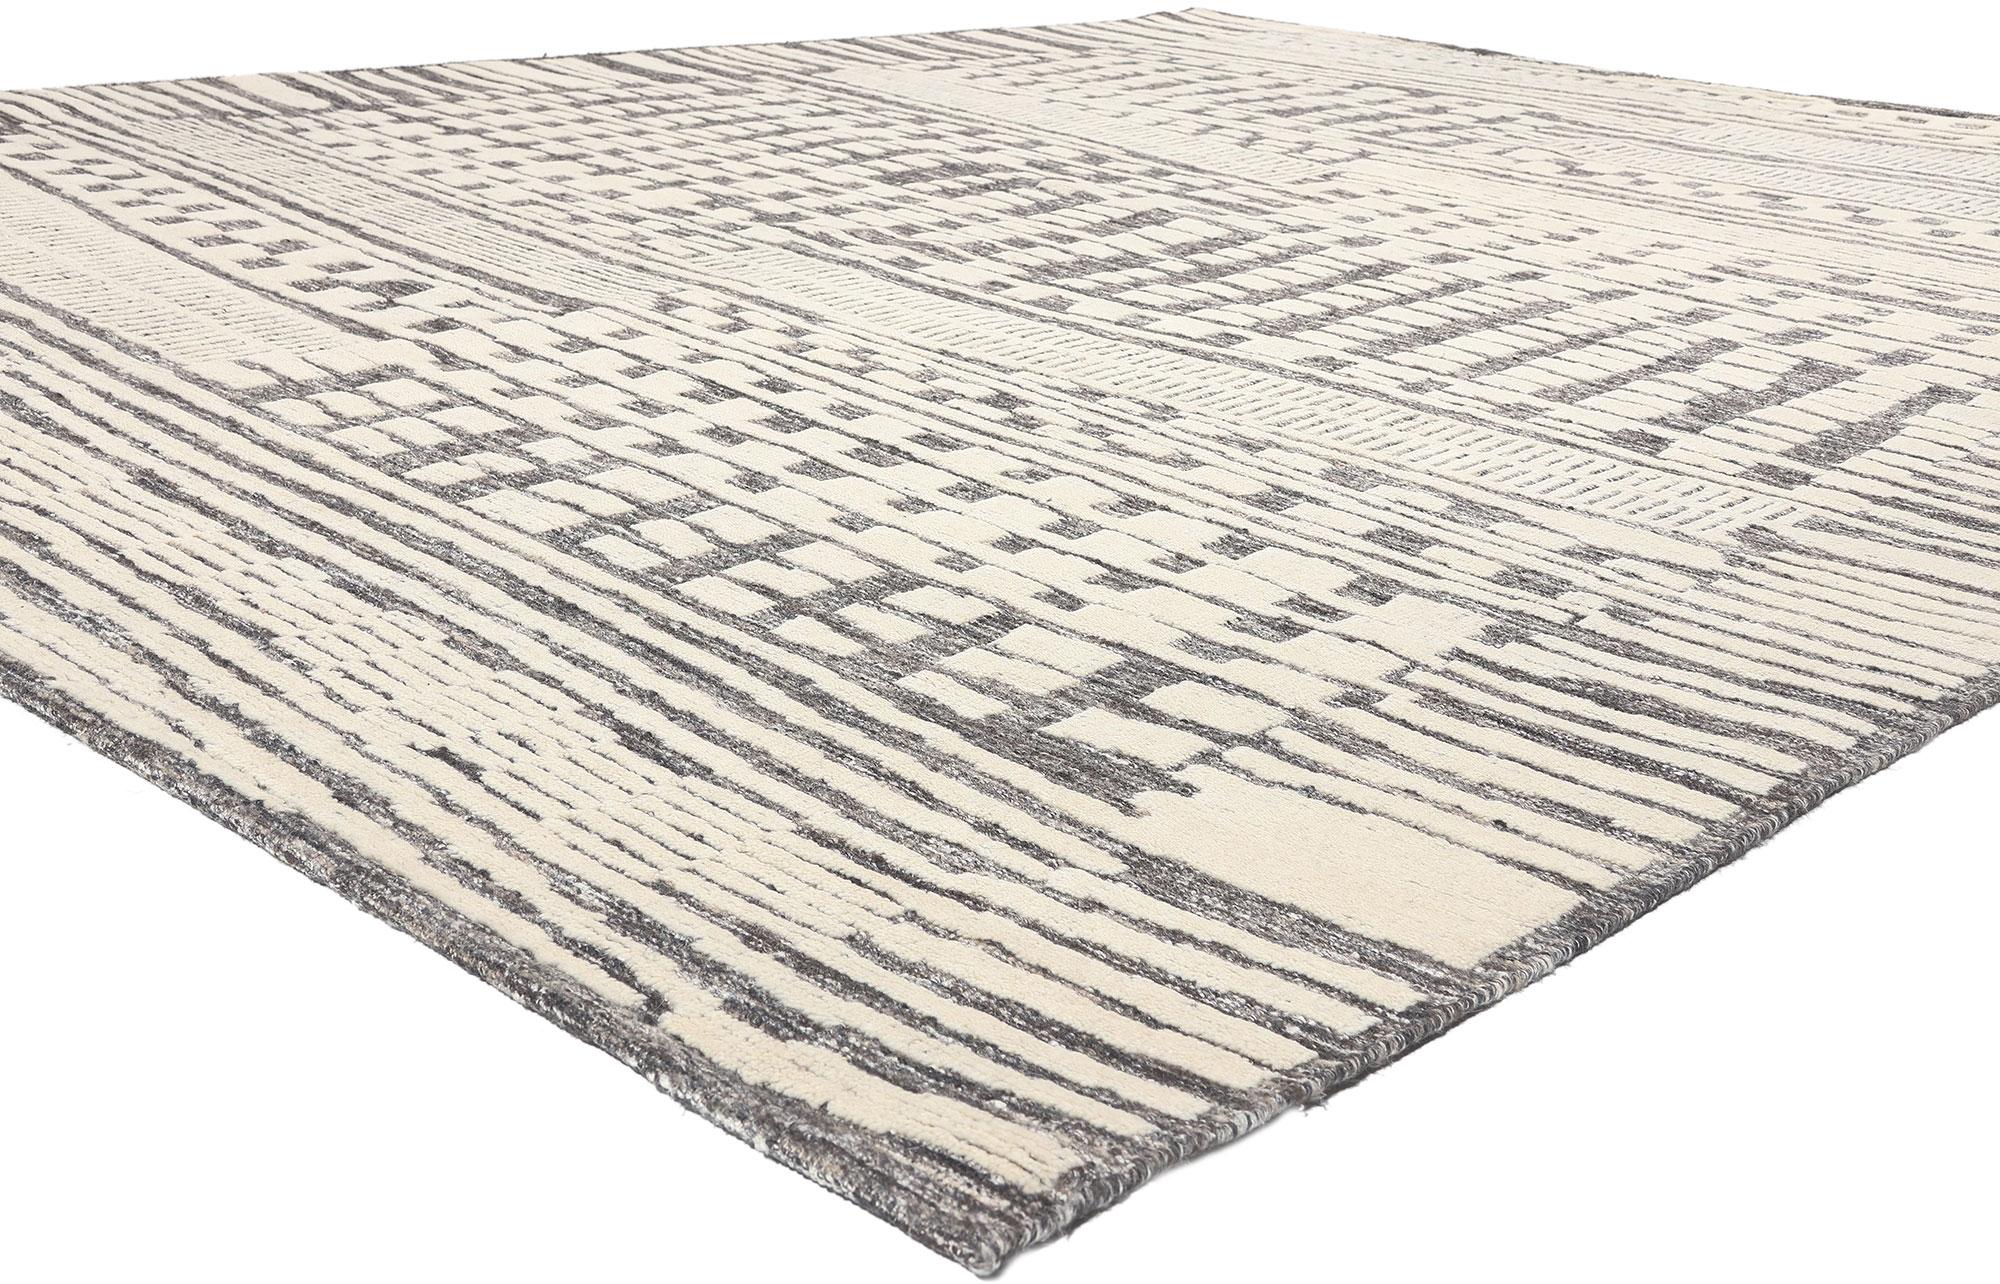 30981 Modern Shibui High-Low Rug, 09'02 x 11'10.
Bauhaus Minimalism meets Shibui in this organic modern high-low rug. The layers of tantalizing textures and neutral color palette woven into this piece work together capturing the essence of